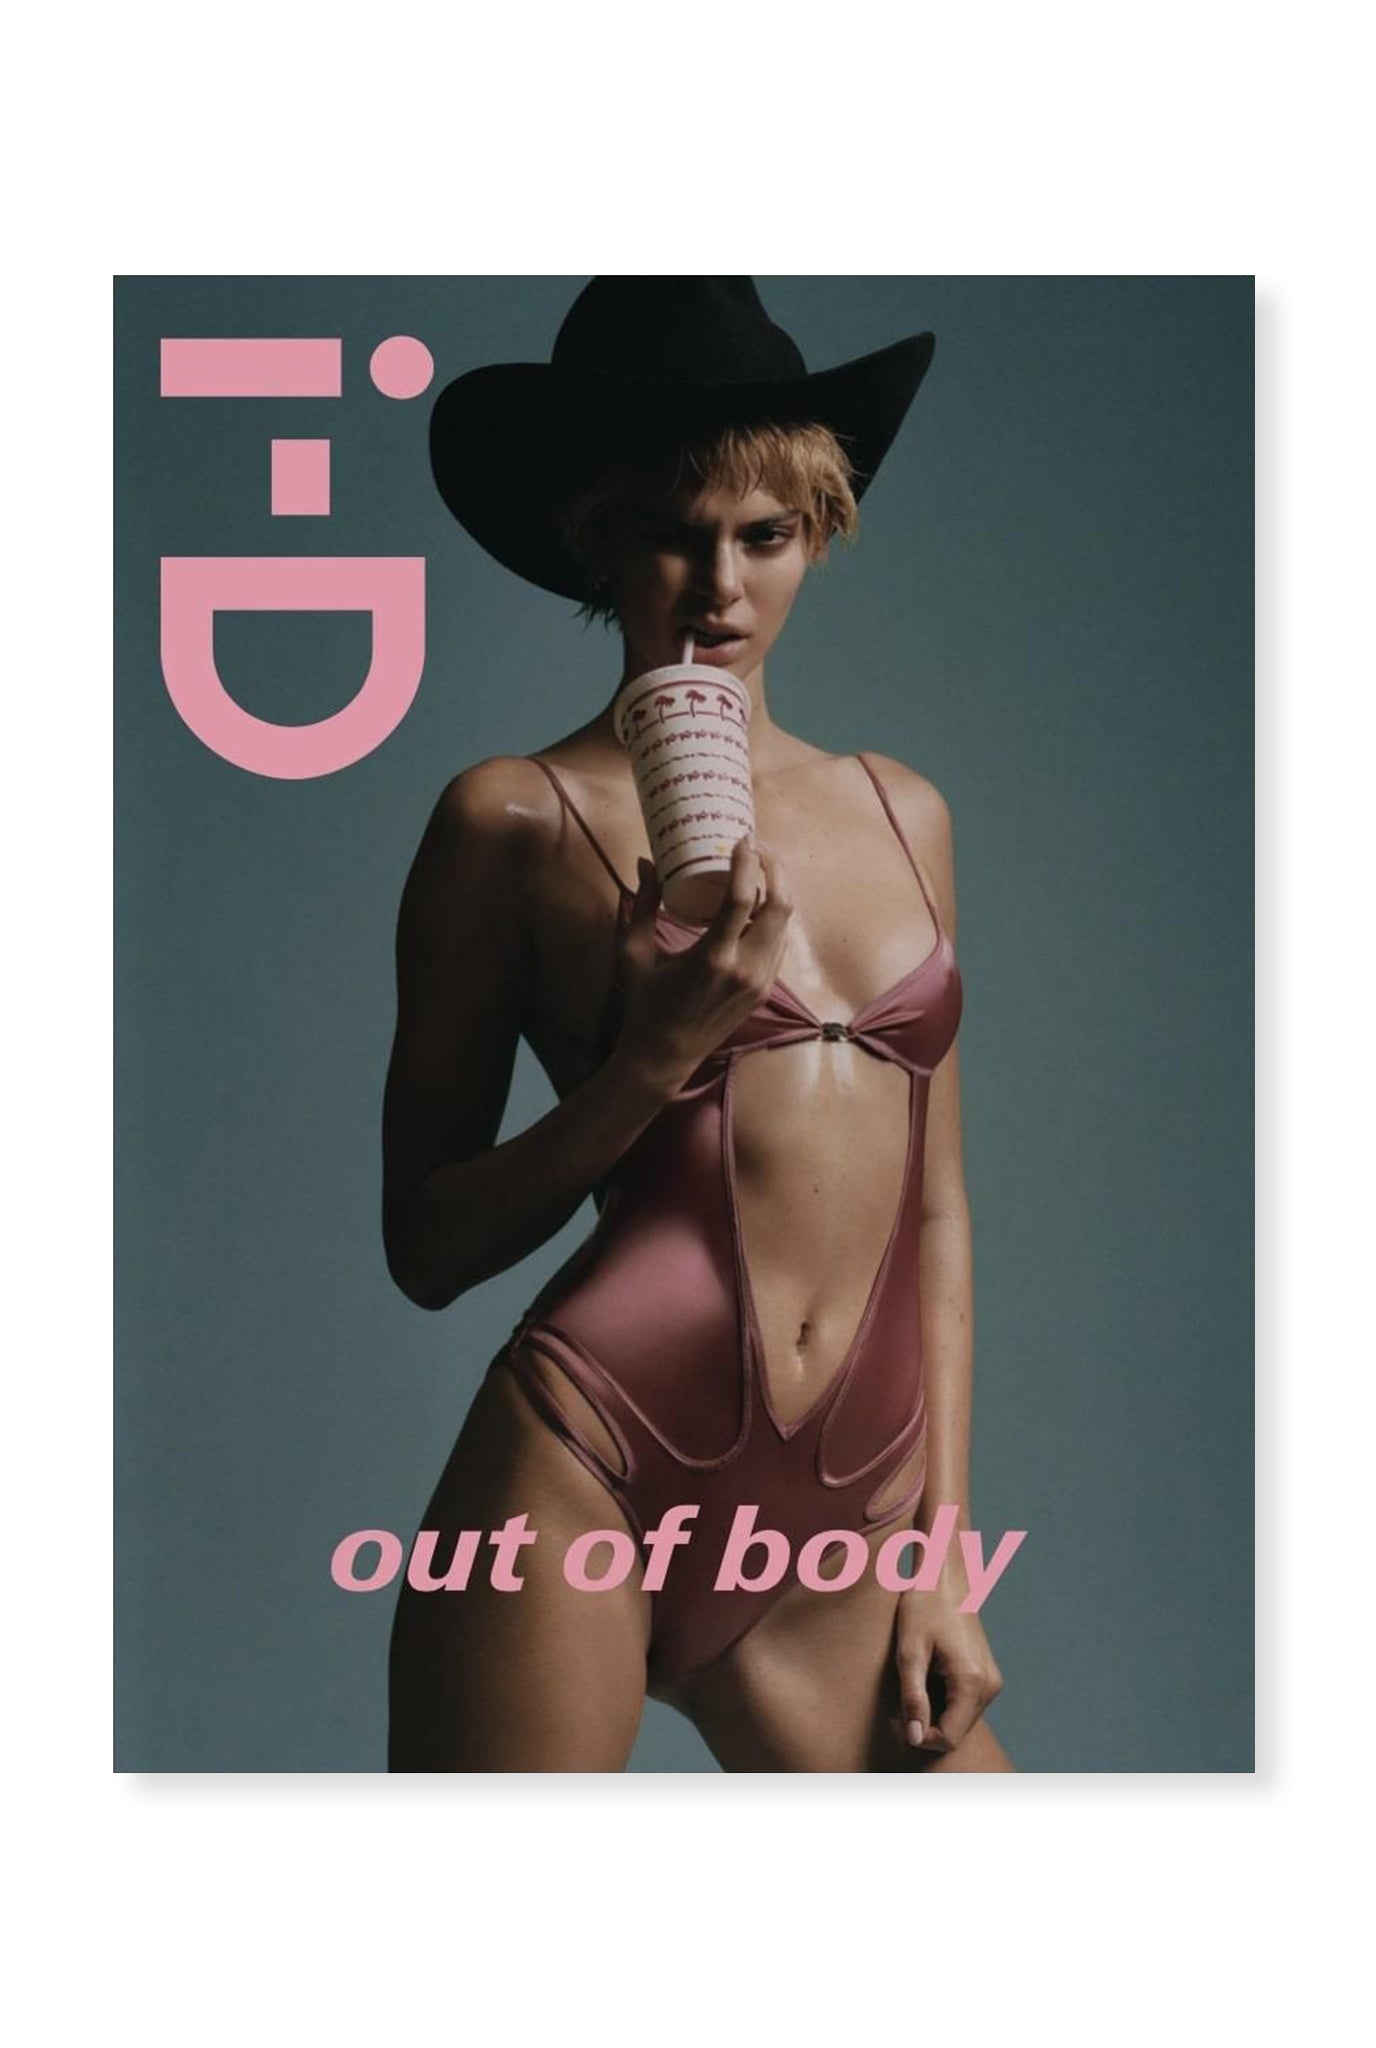 i-D, Issue 367 - The Out Of Body Issue